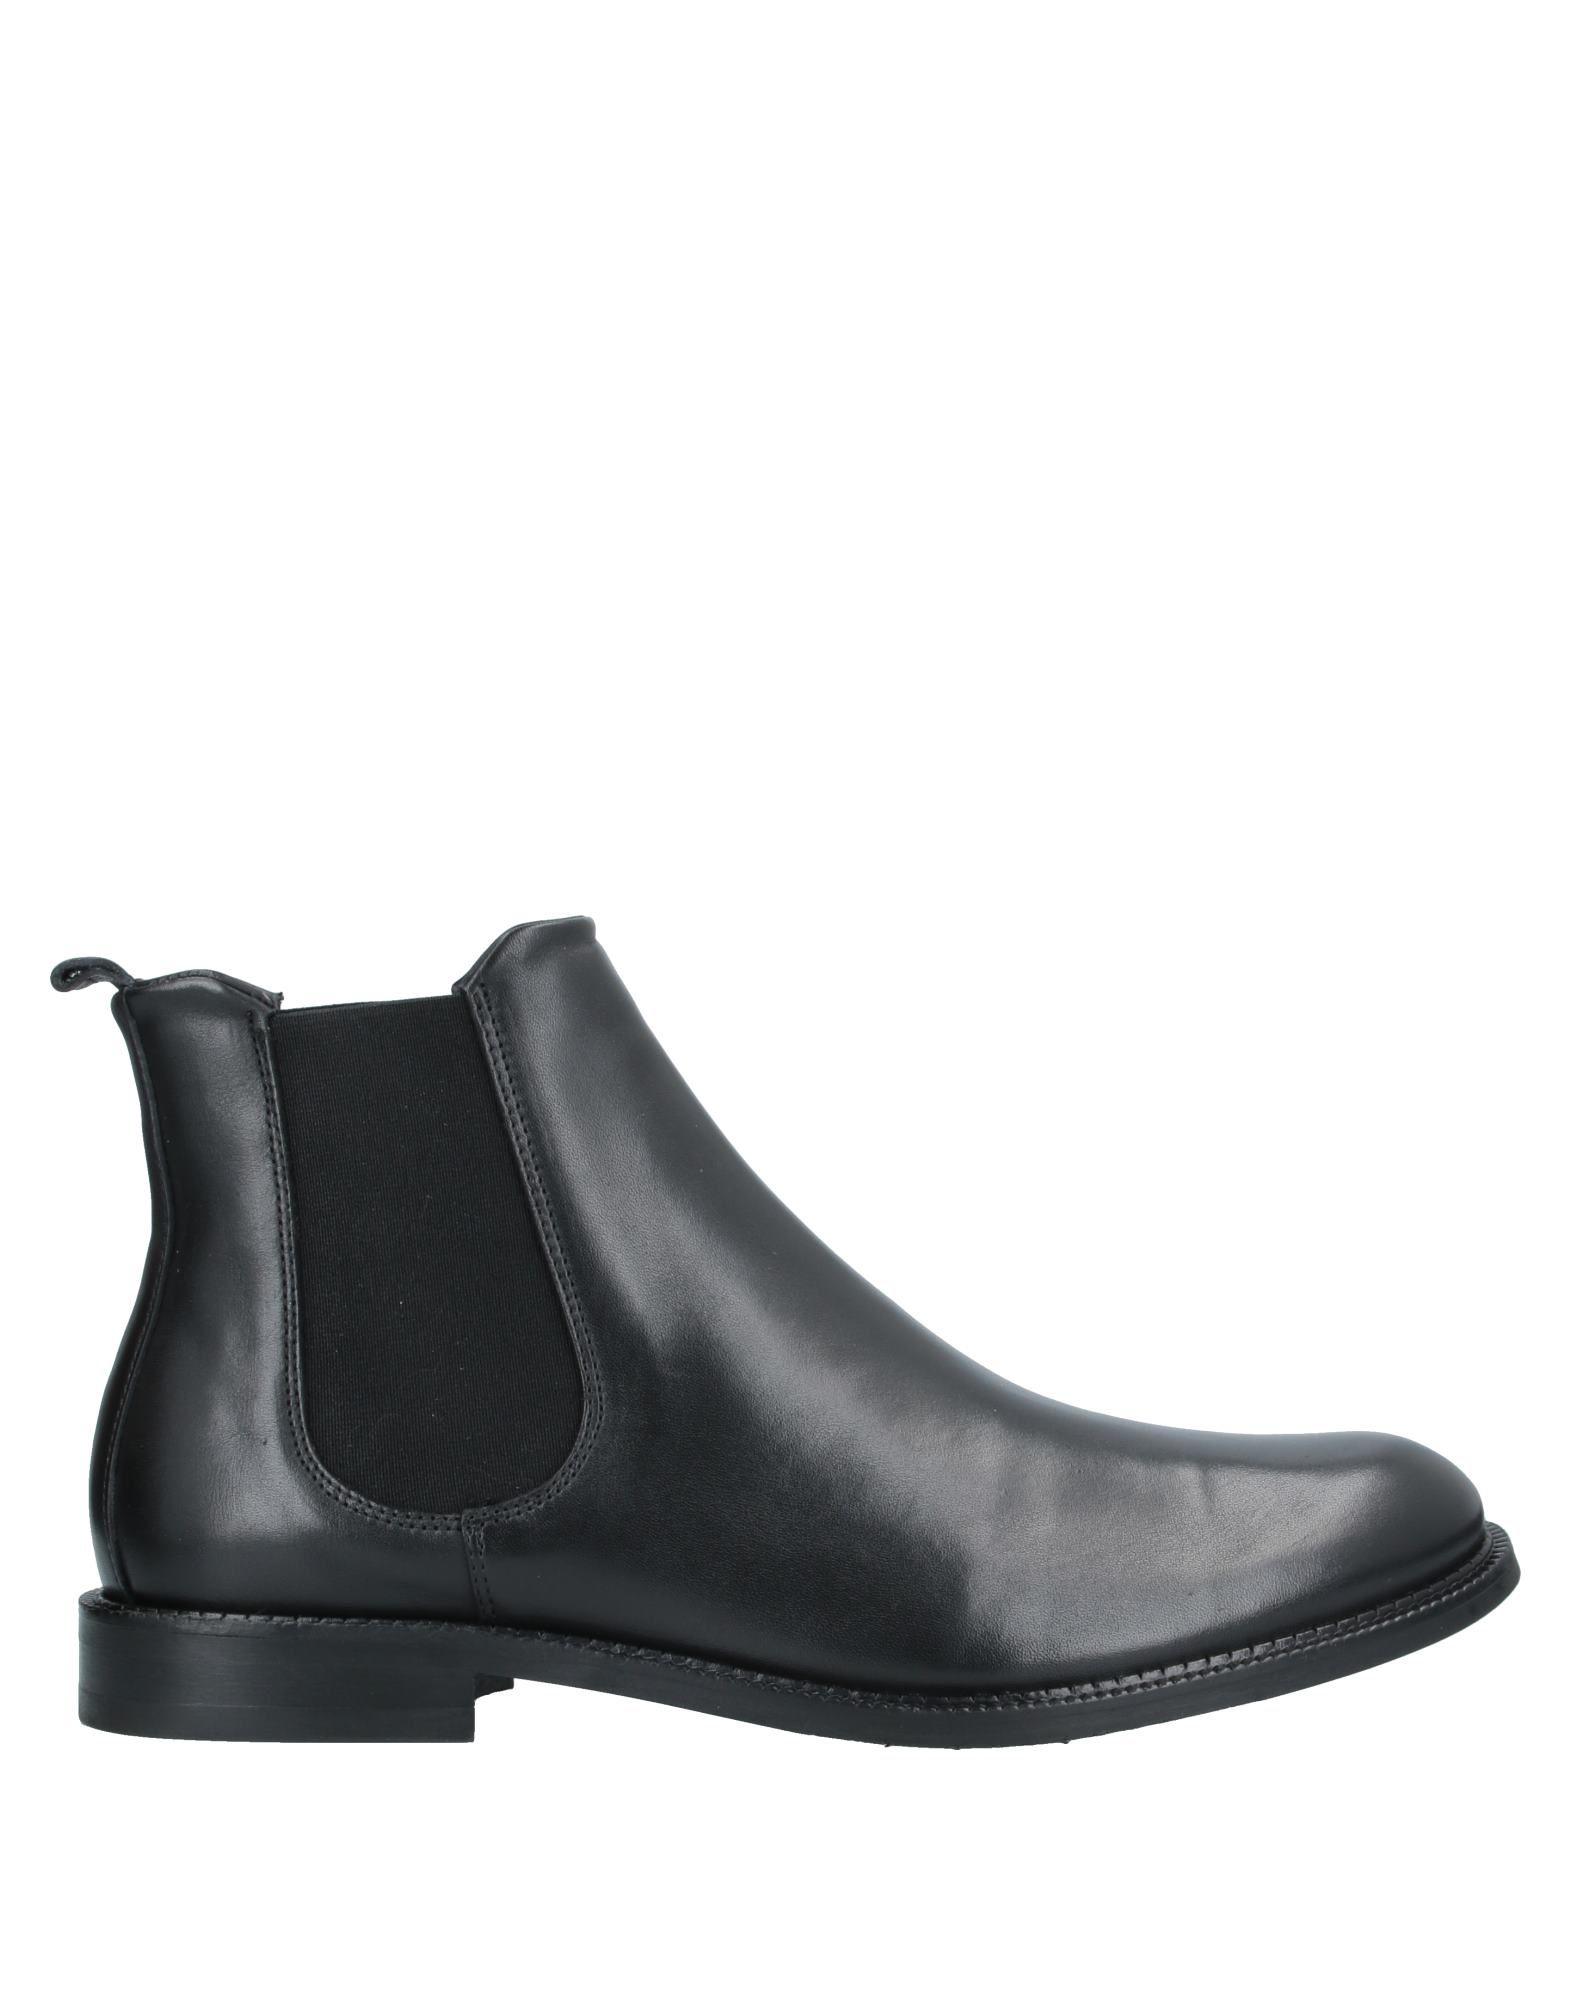 Royal Republiq Leather Ankle Boots in Black for Men - Lyst